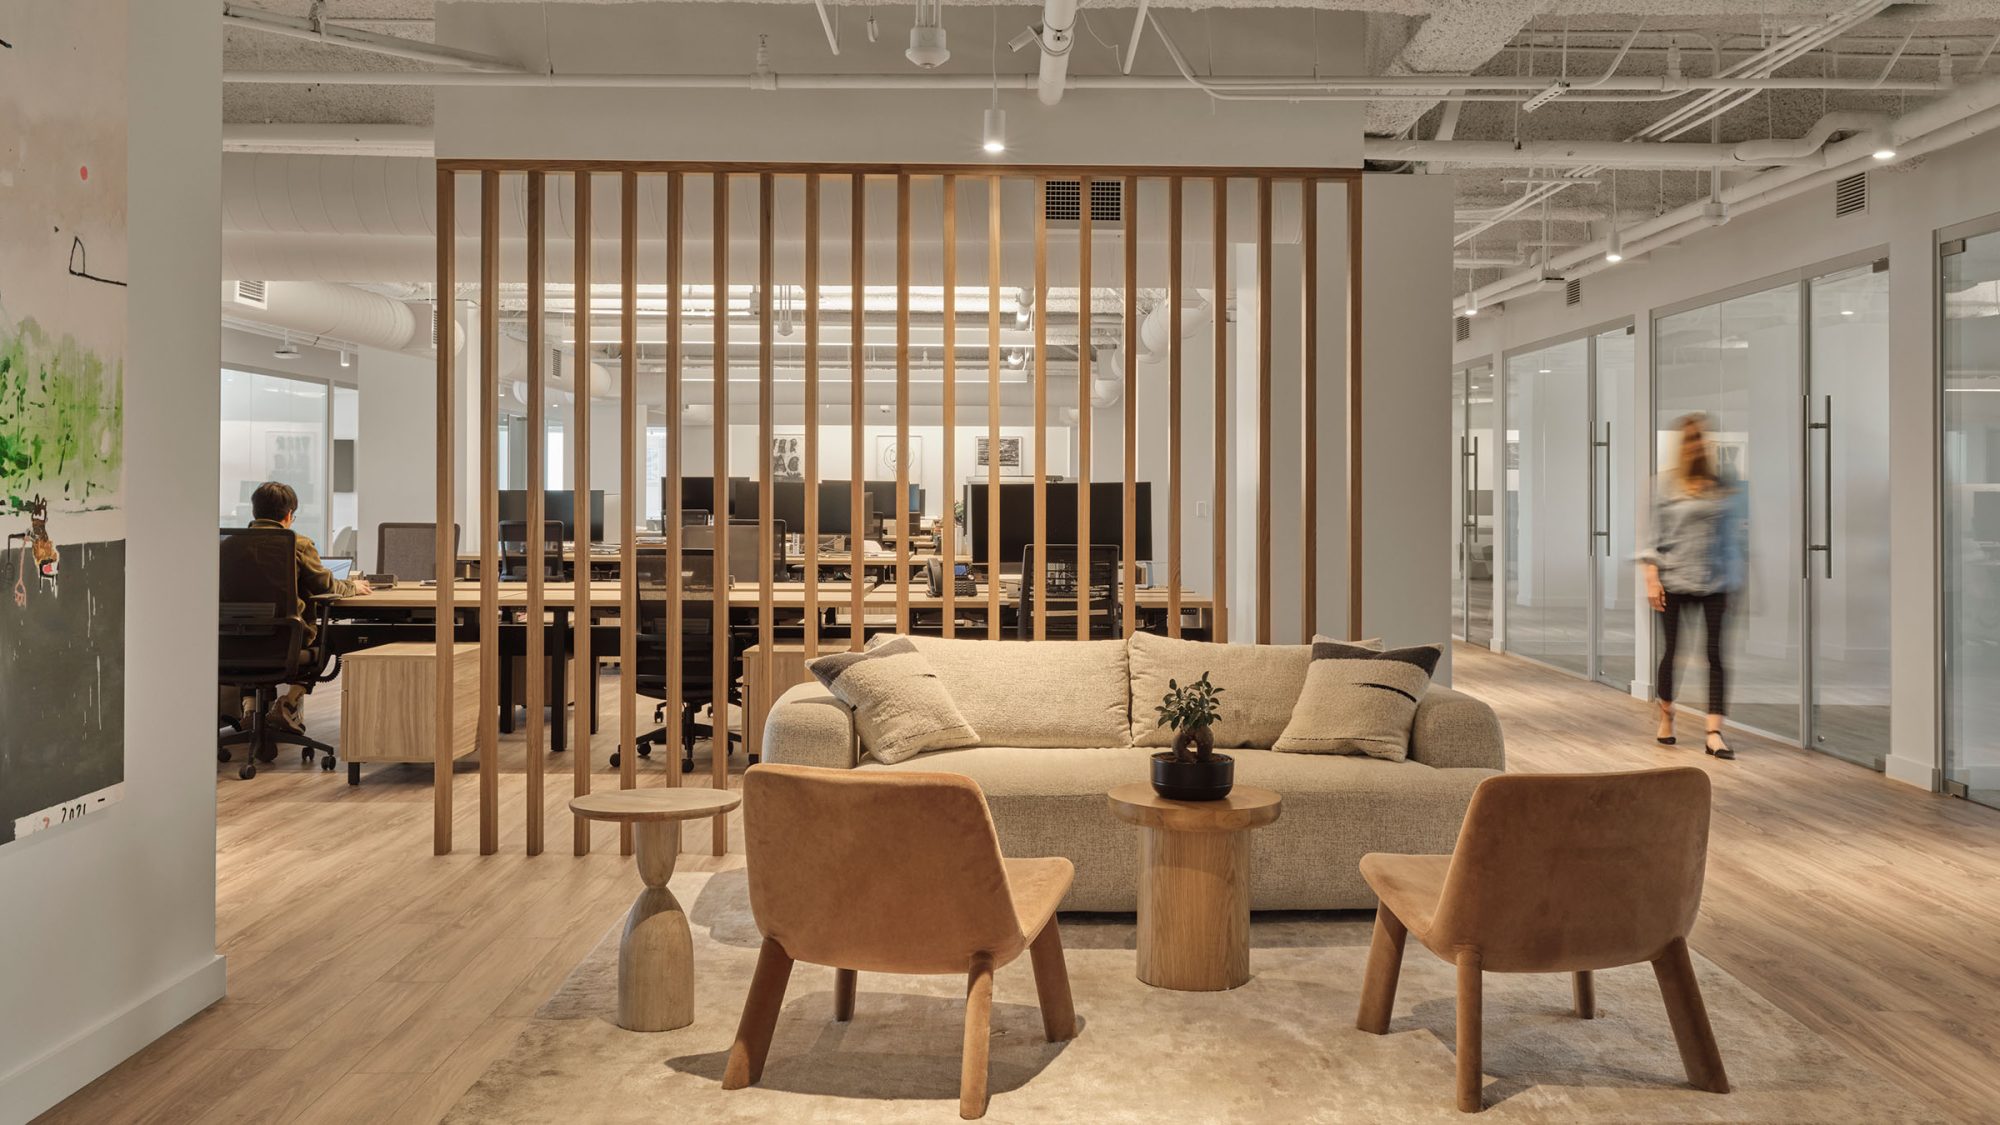 Office design by M Moser in Los Angeles for GMB Azoff Company featuring hospitality-driven design elements, comforting furniture and bright, collaborative spaces throughout the open-plan office.